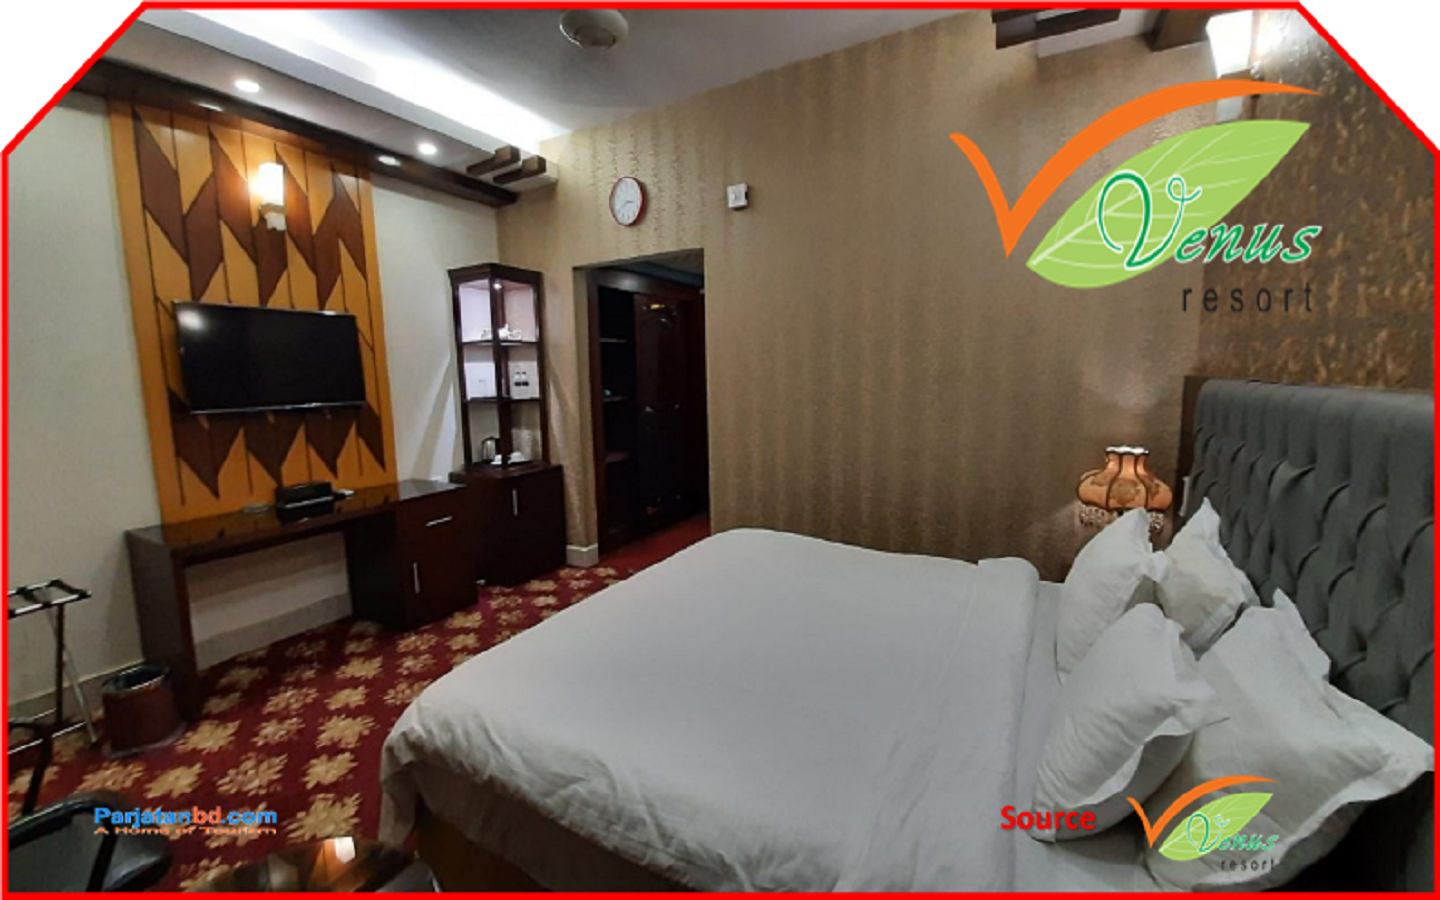 Room Super Deluxe Couple Bed -1, Venus Resort and Coffee House